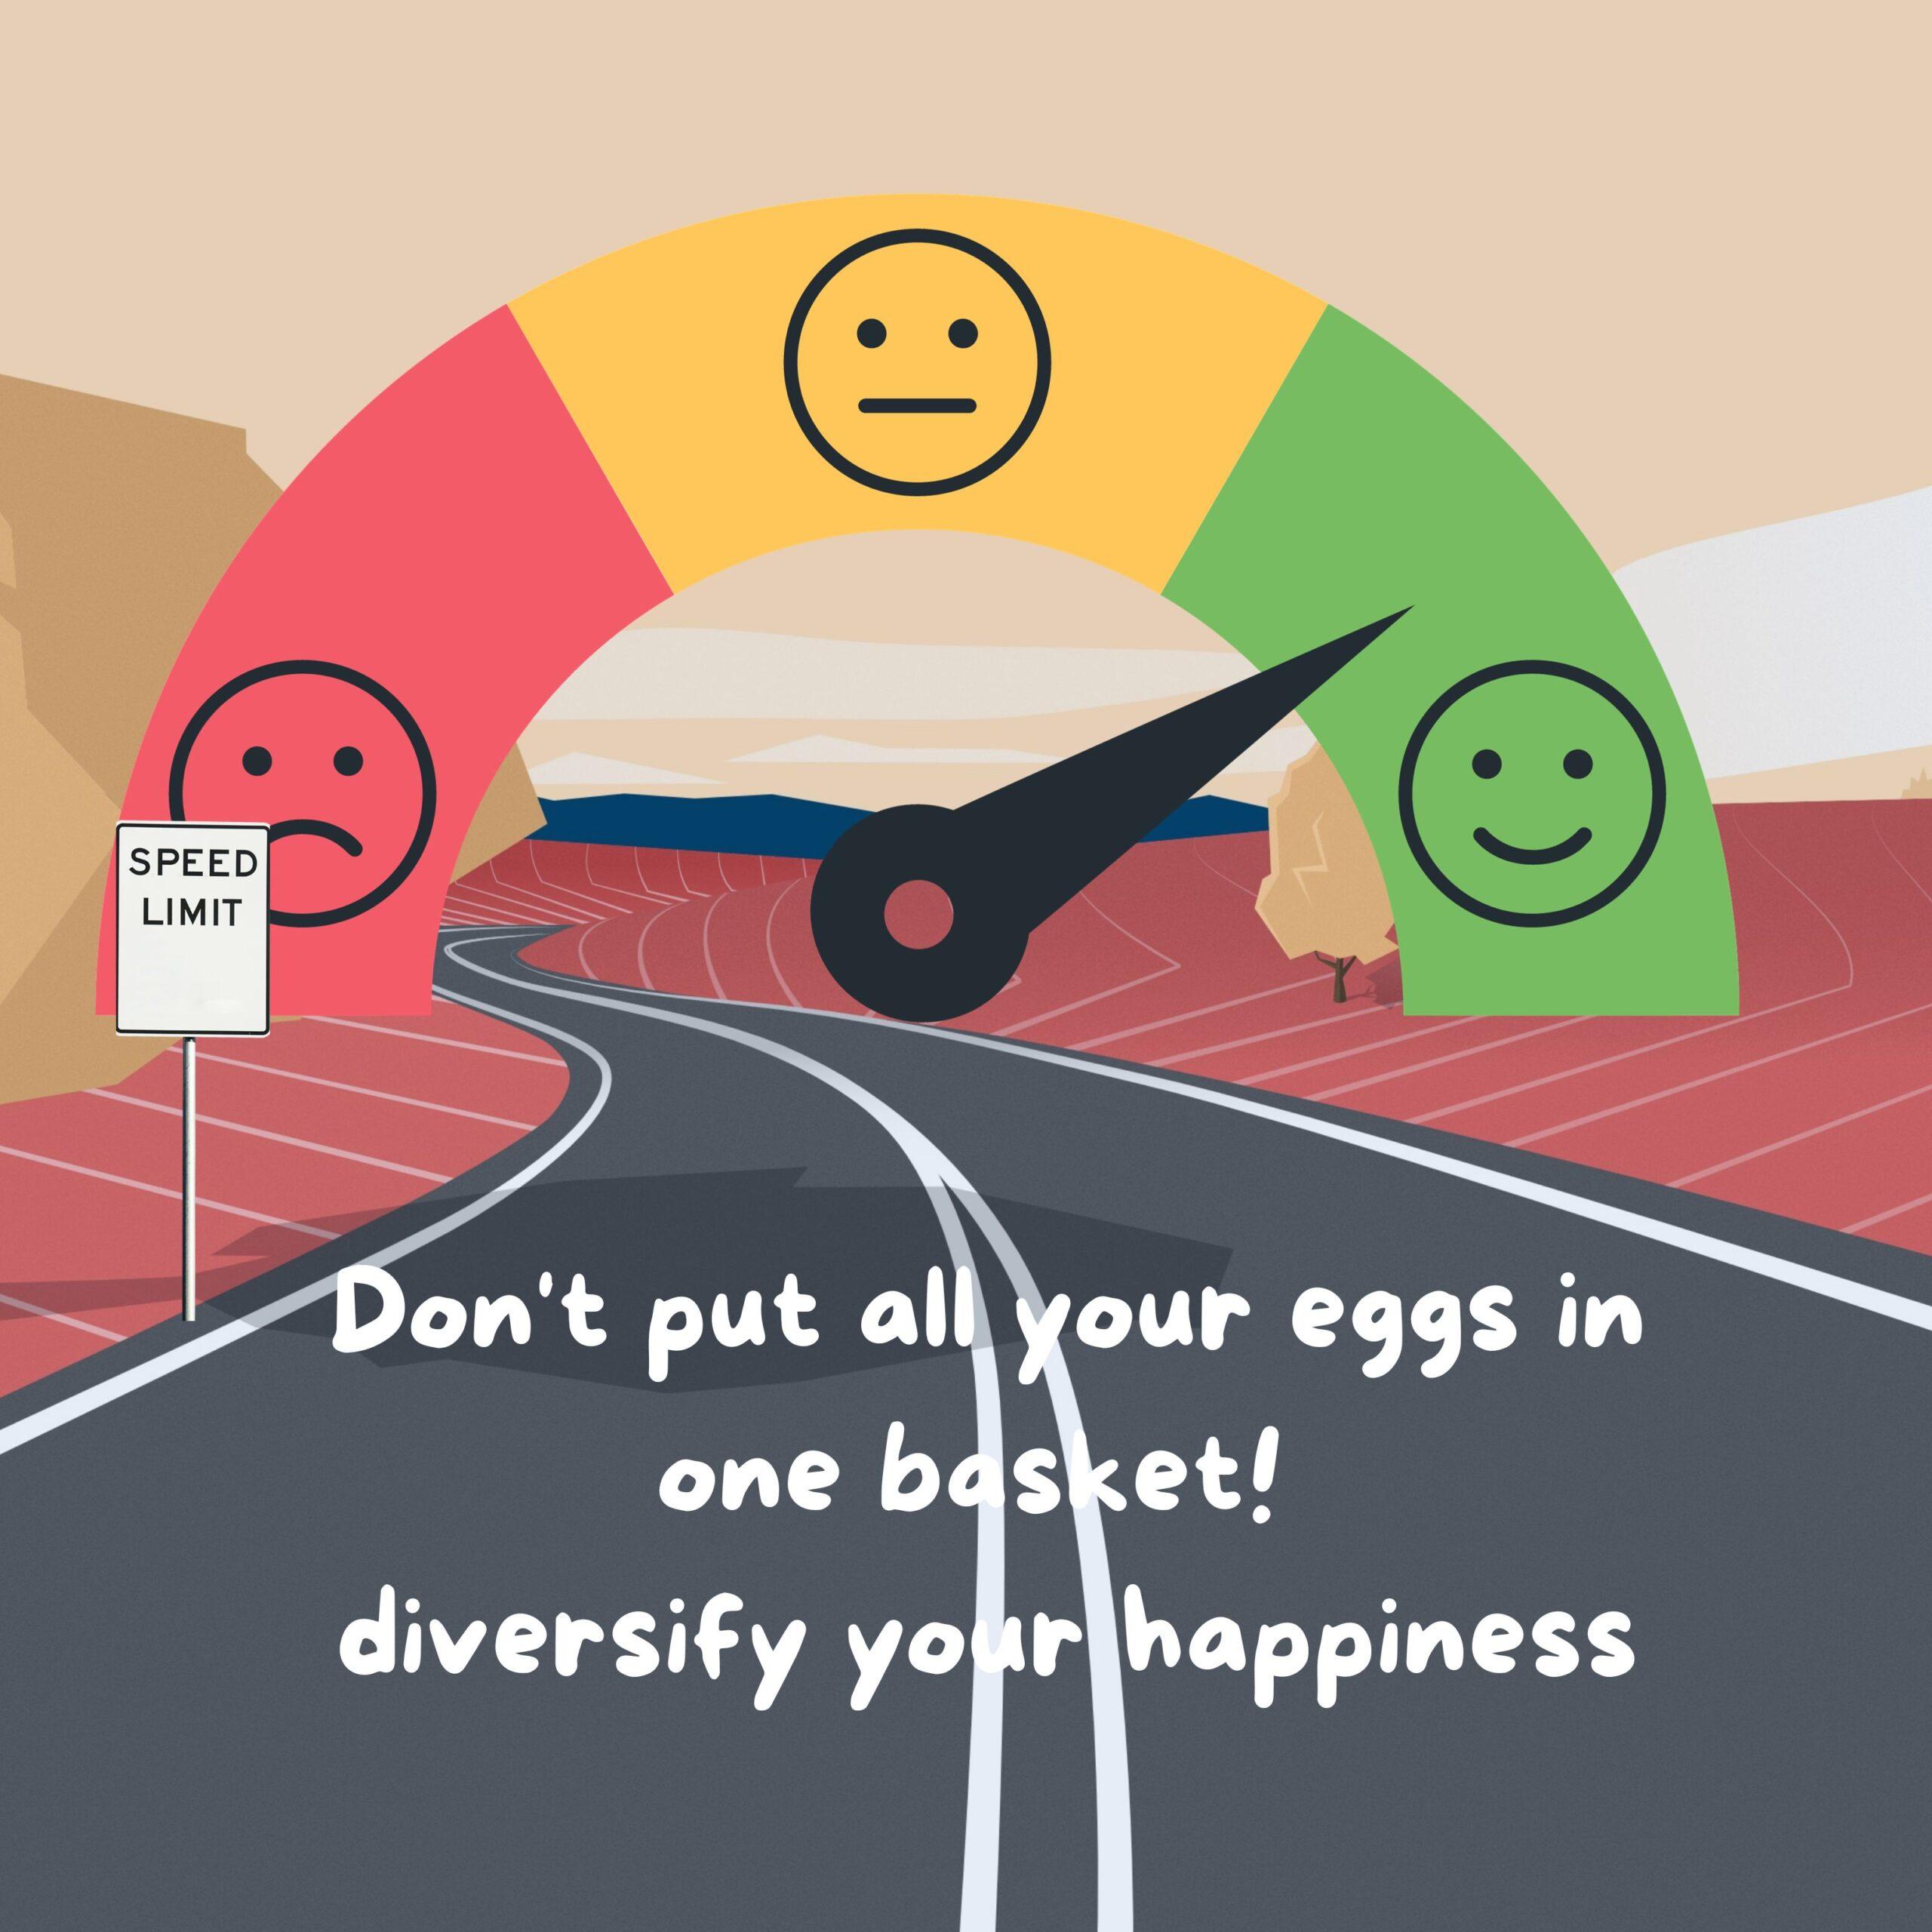 Don't put all your eggs in one basket! diversify your happiness